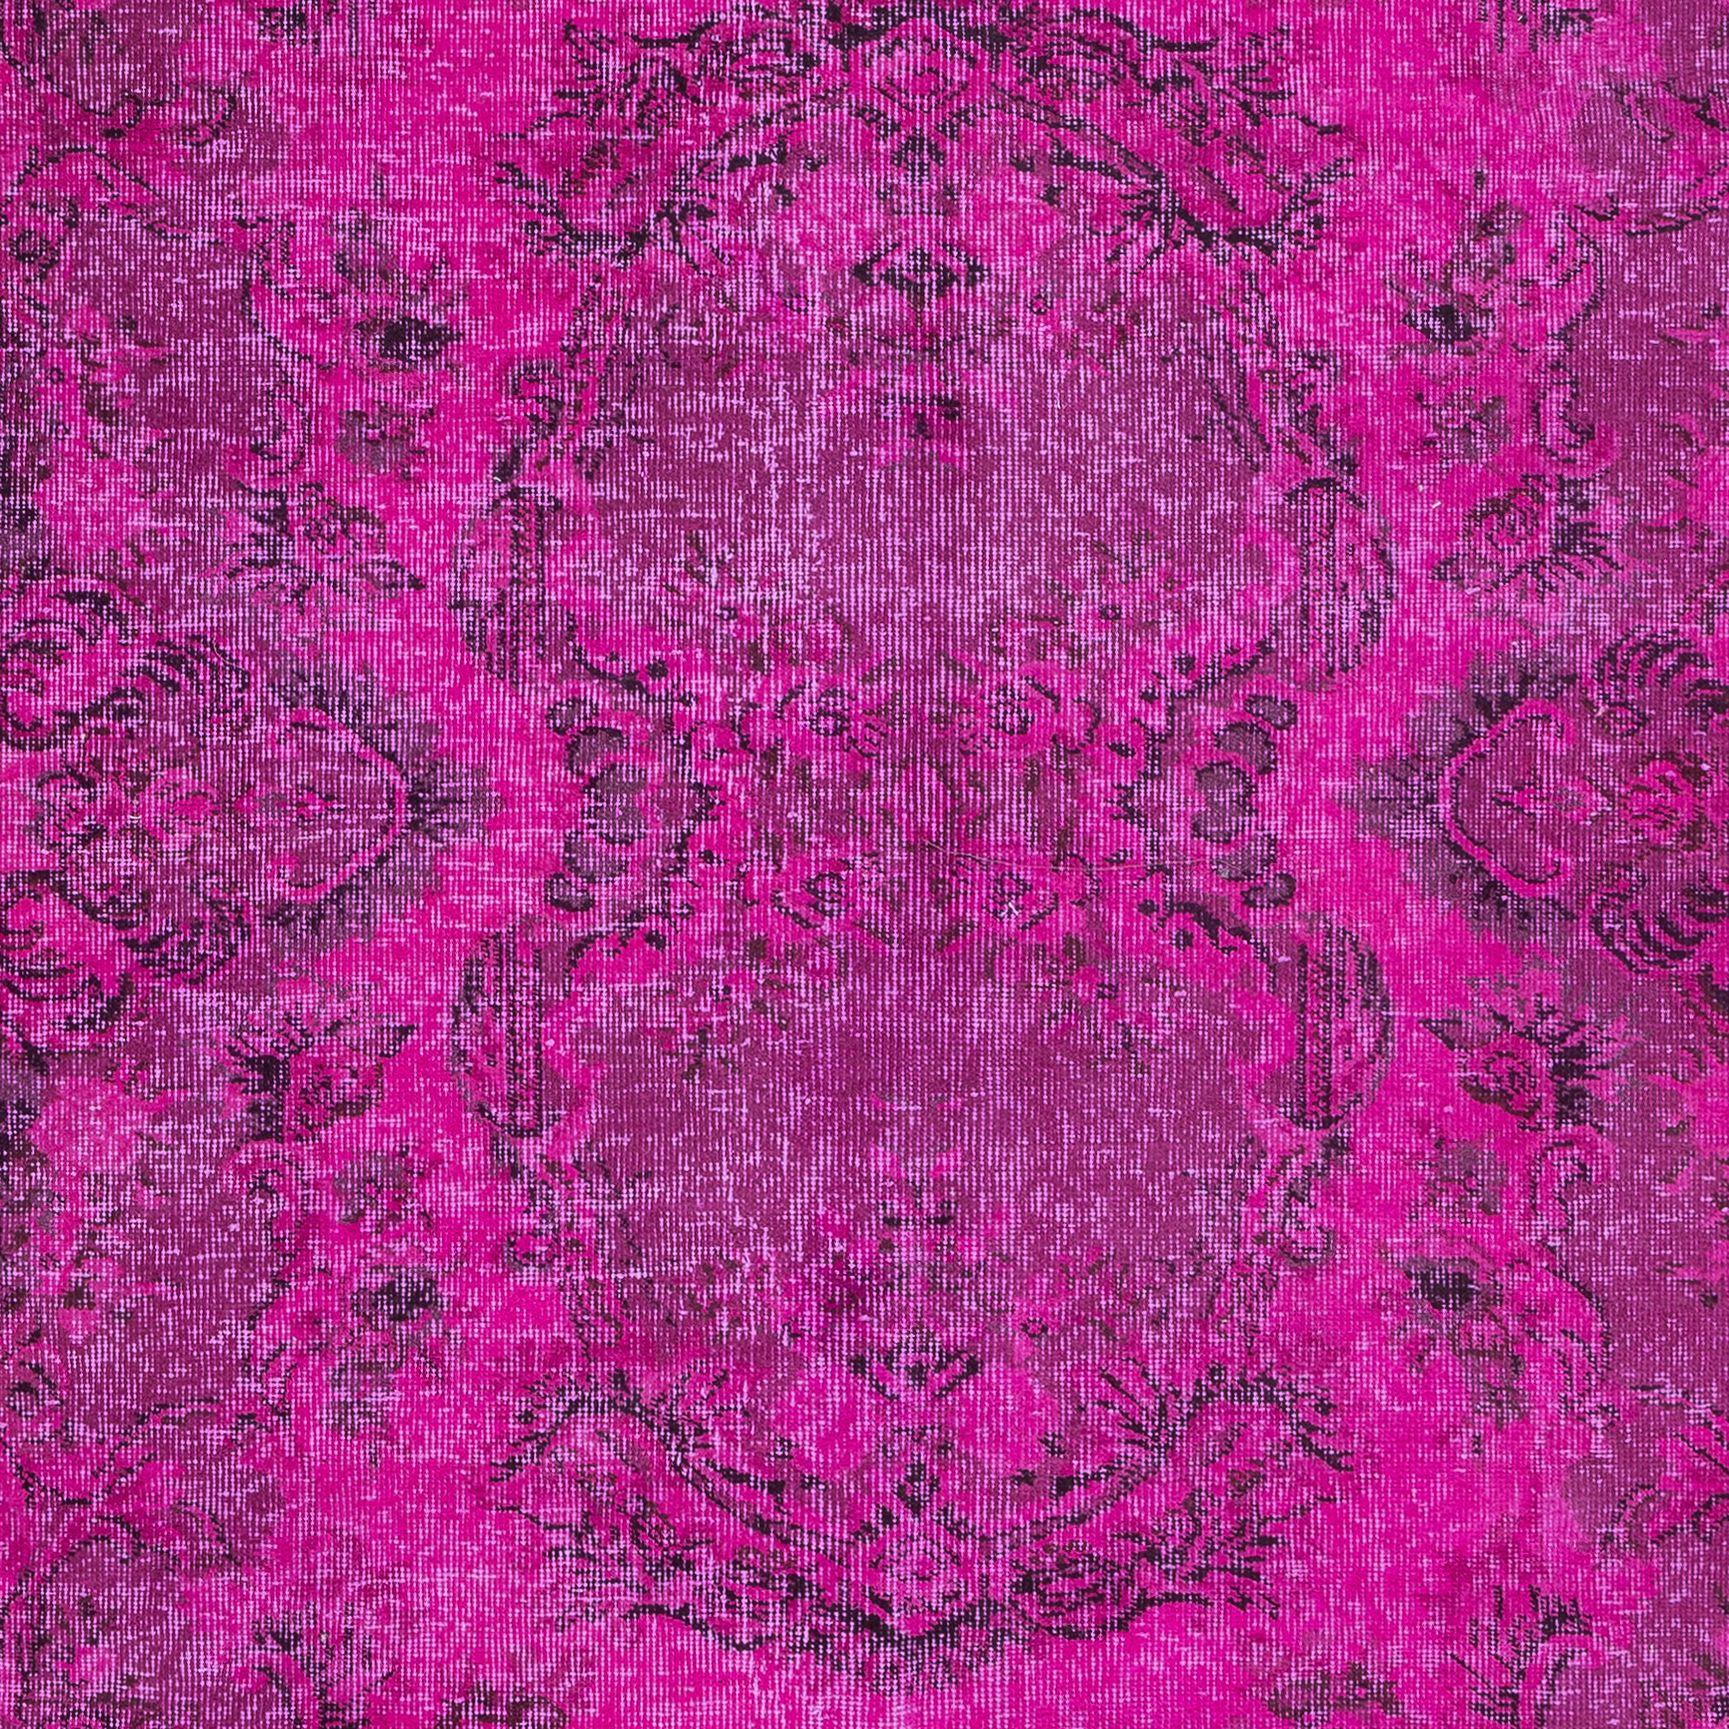 Turkish 5.2x8.3 Ft Pink Aubusson Inspired Rug for Modern Interiors, Handmade in Turkey For Sale